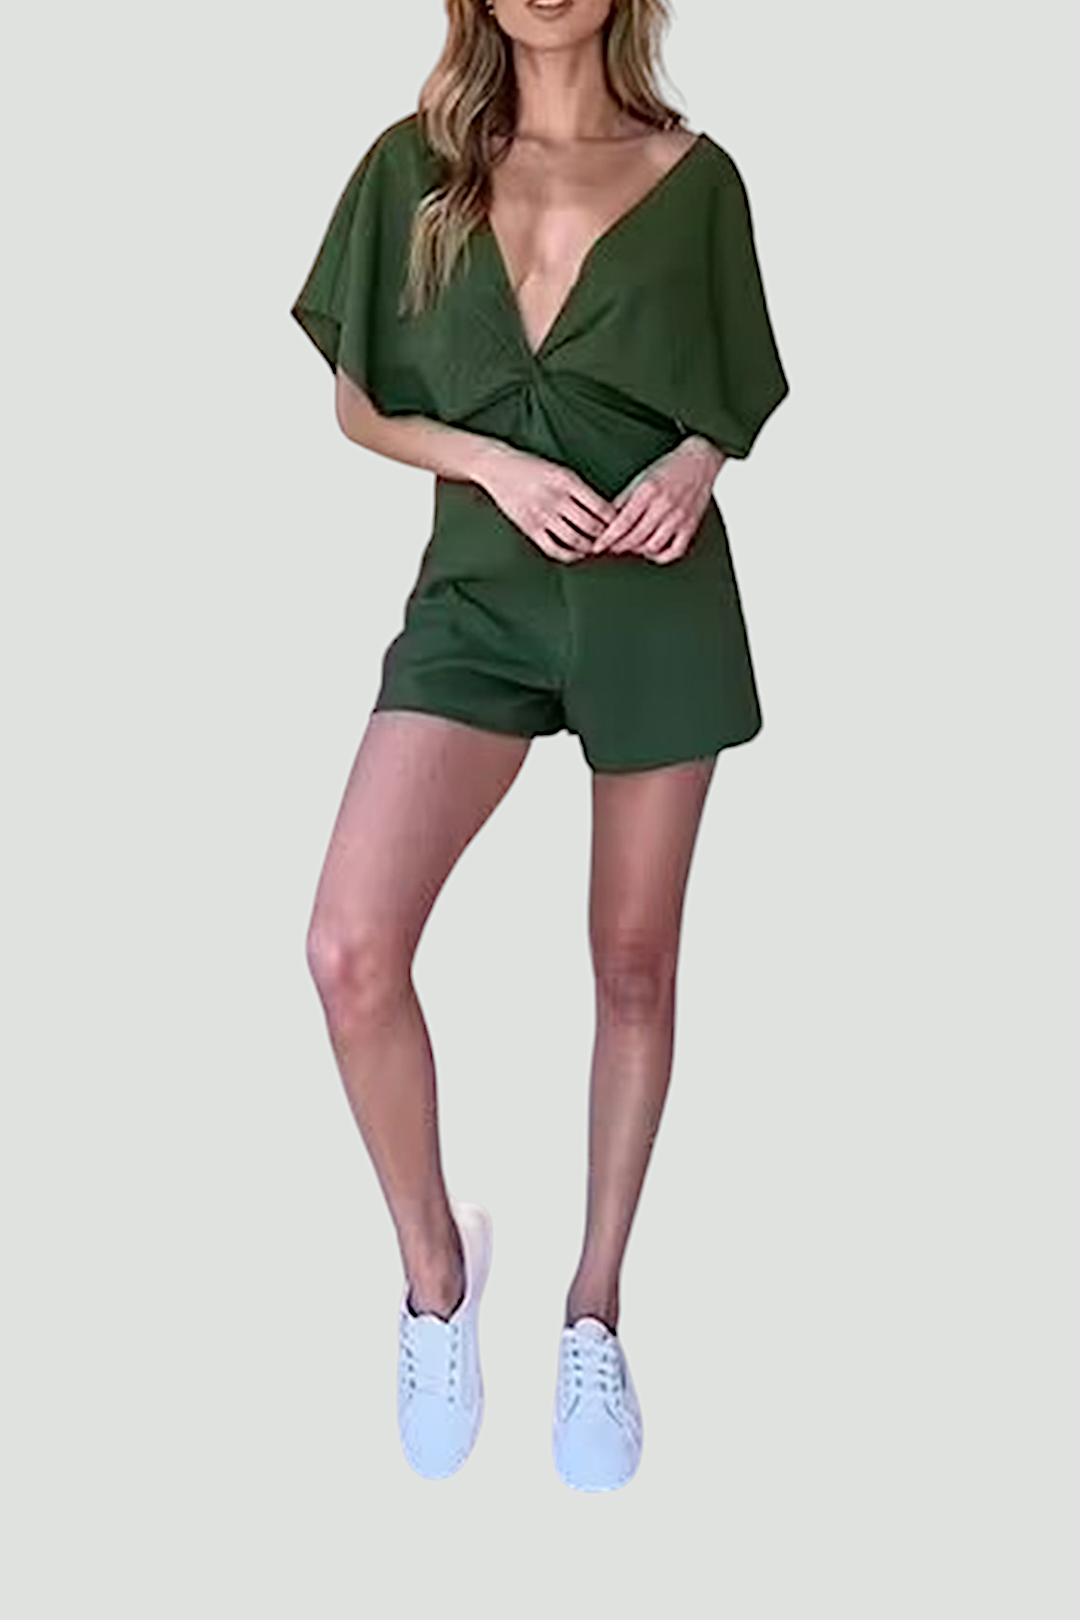 One Fell Swoop Provence Playsuit in Green